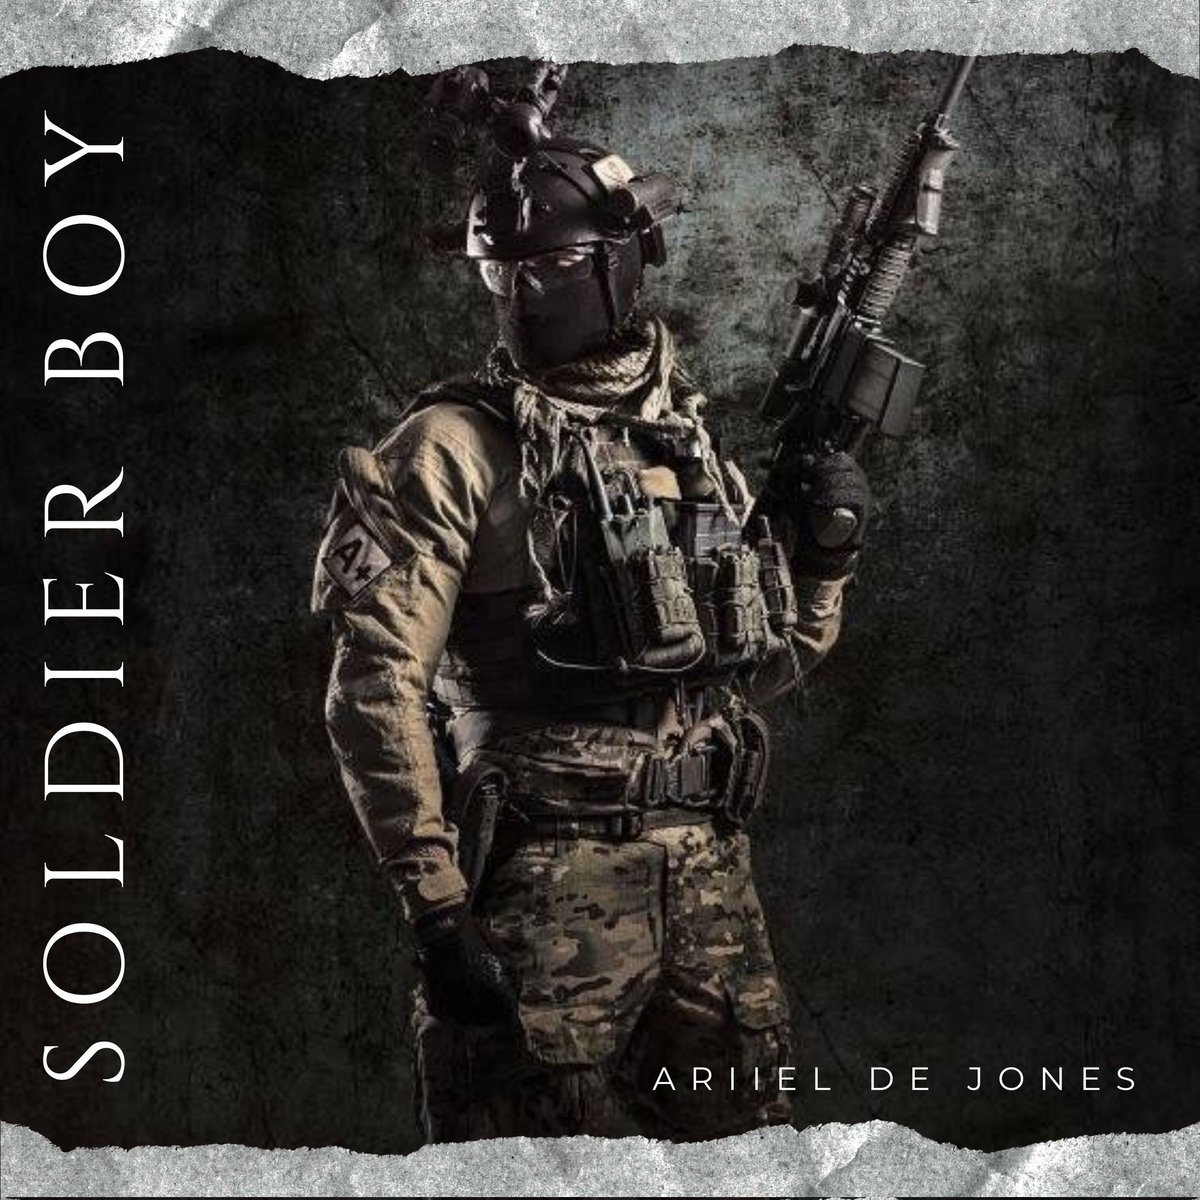 This theme talks about a young man born in Queens, where he dreamed of being a great soldier. But I never get to do it. Make your recerva in:
share.amuse.io/track/ariiel-d… 
youtu.be/E84RueoXY4I

#AriielDeJones #SoldierBoy #amuseartists @amuse_io